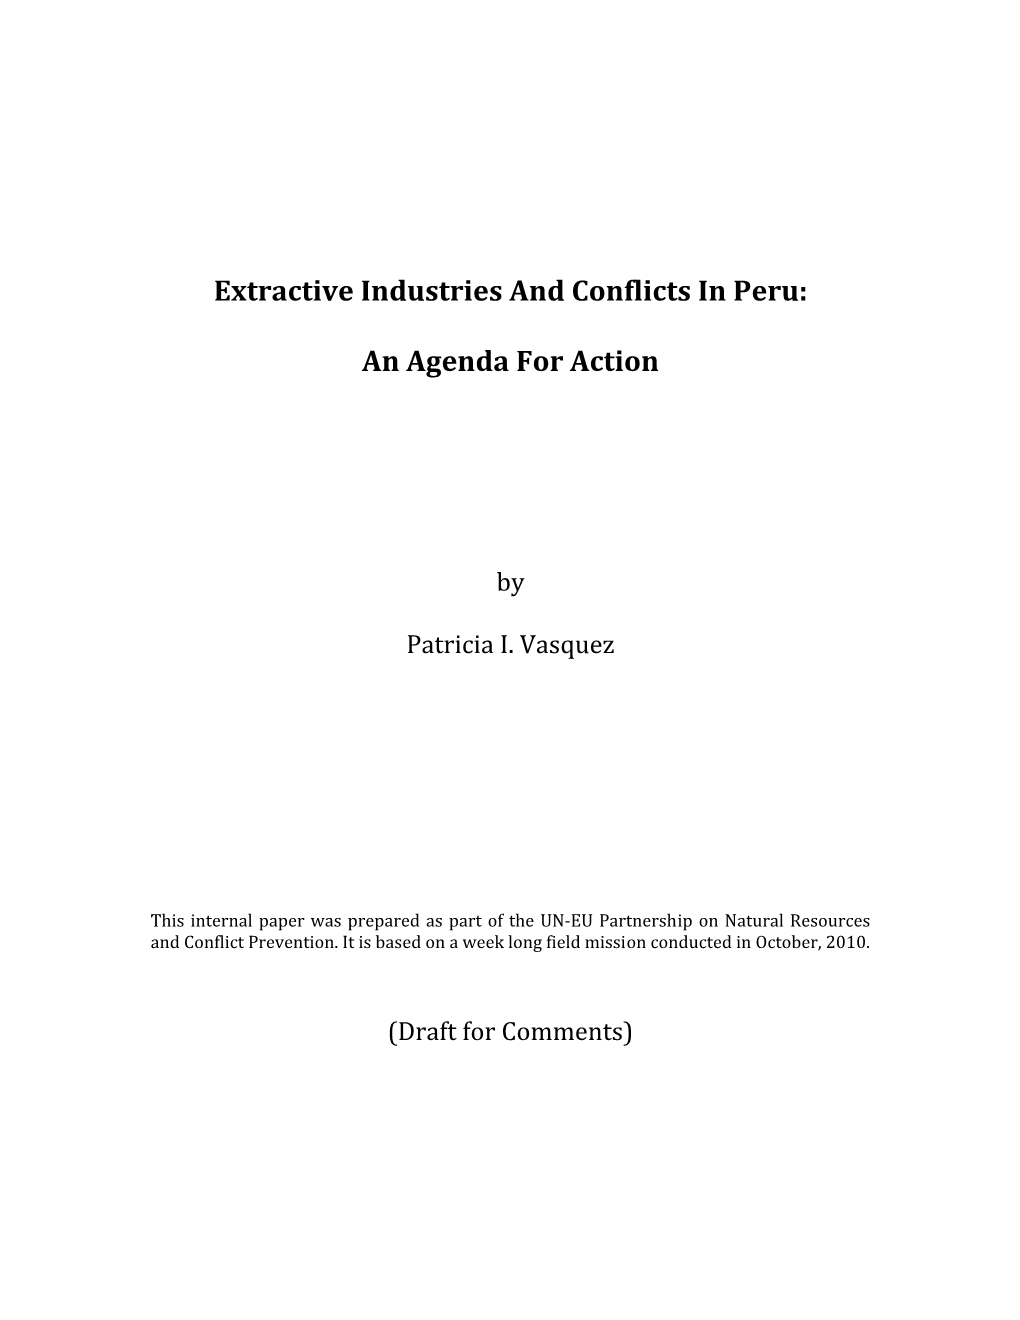 Extractive Industries and Conflicts in Peru